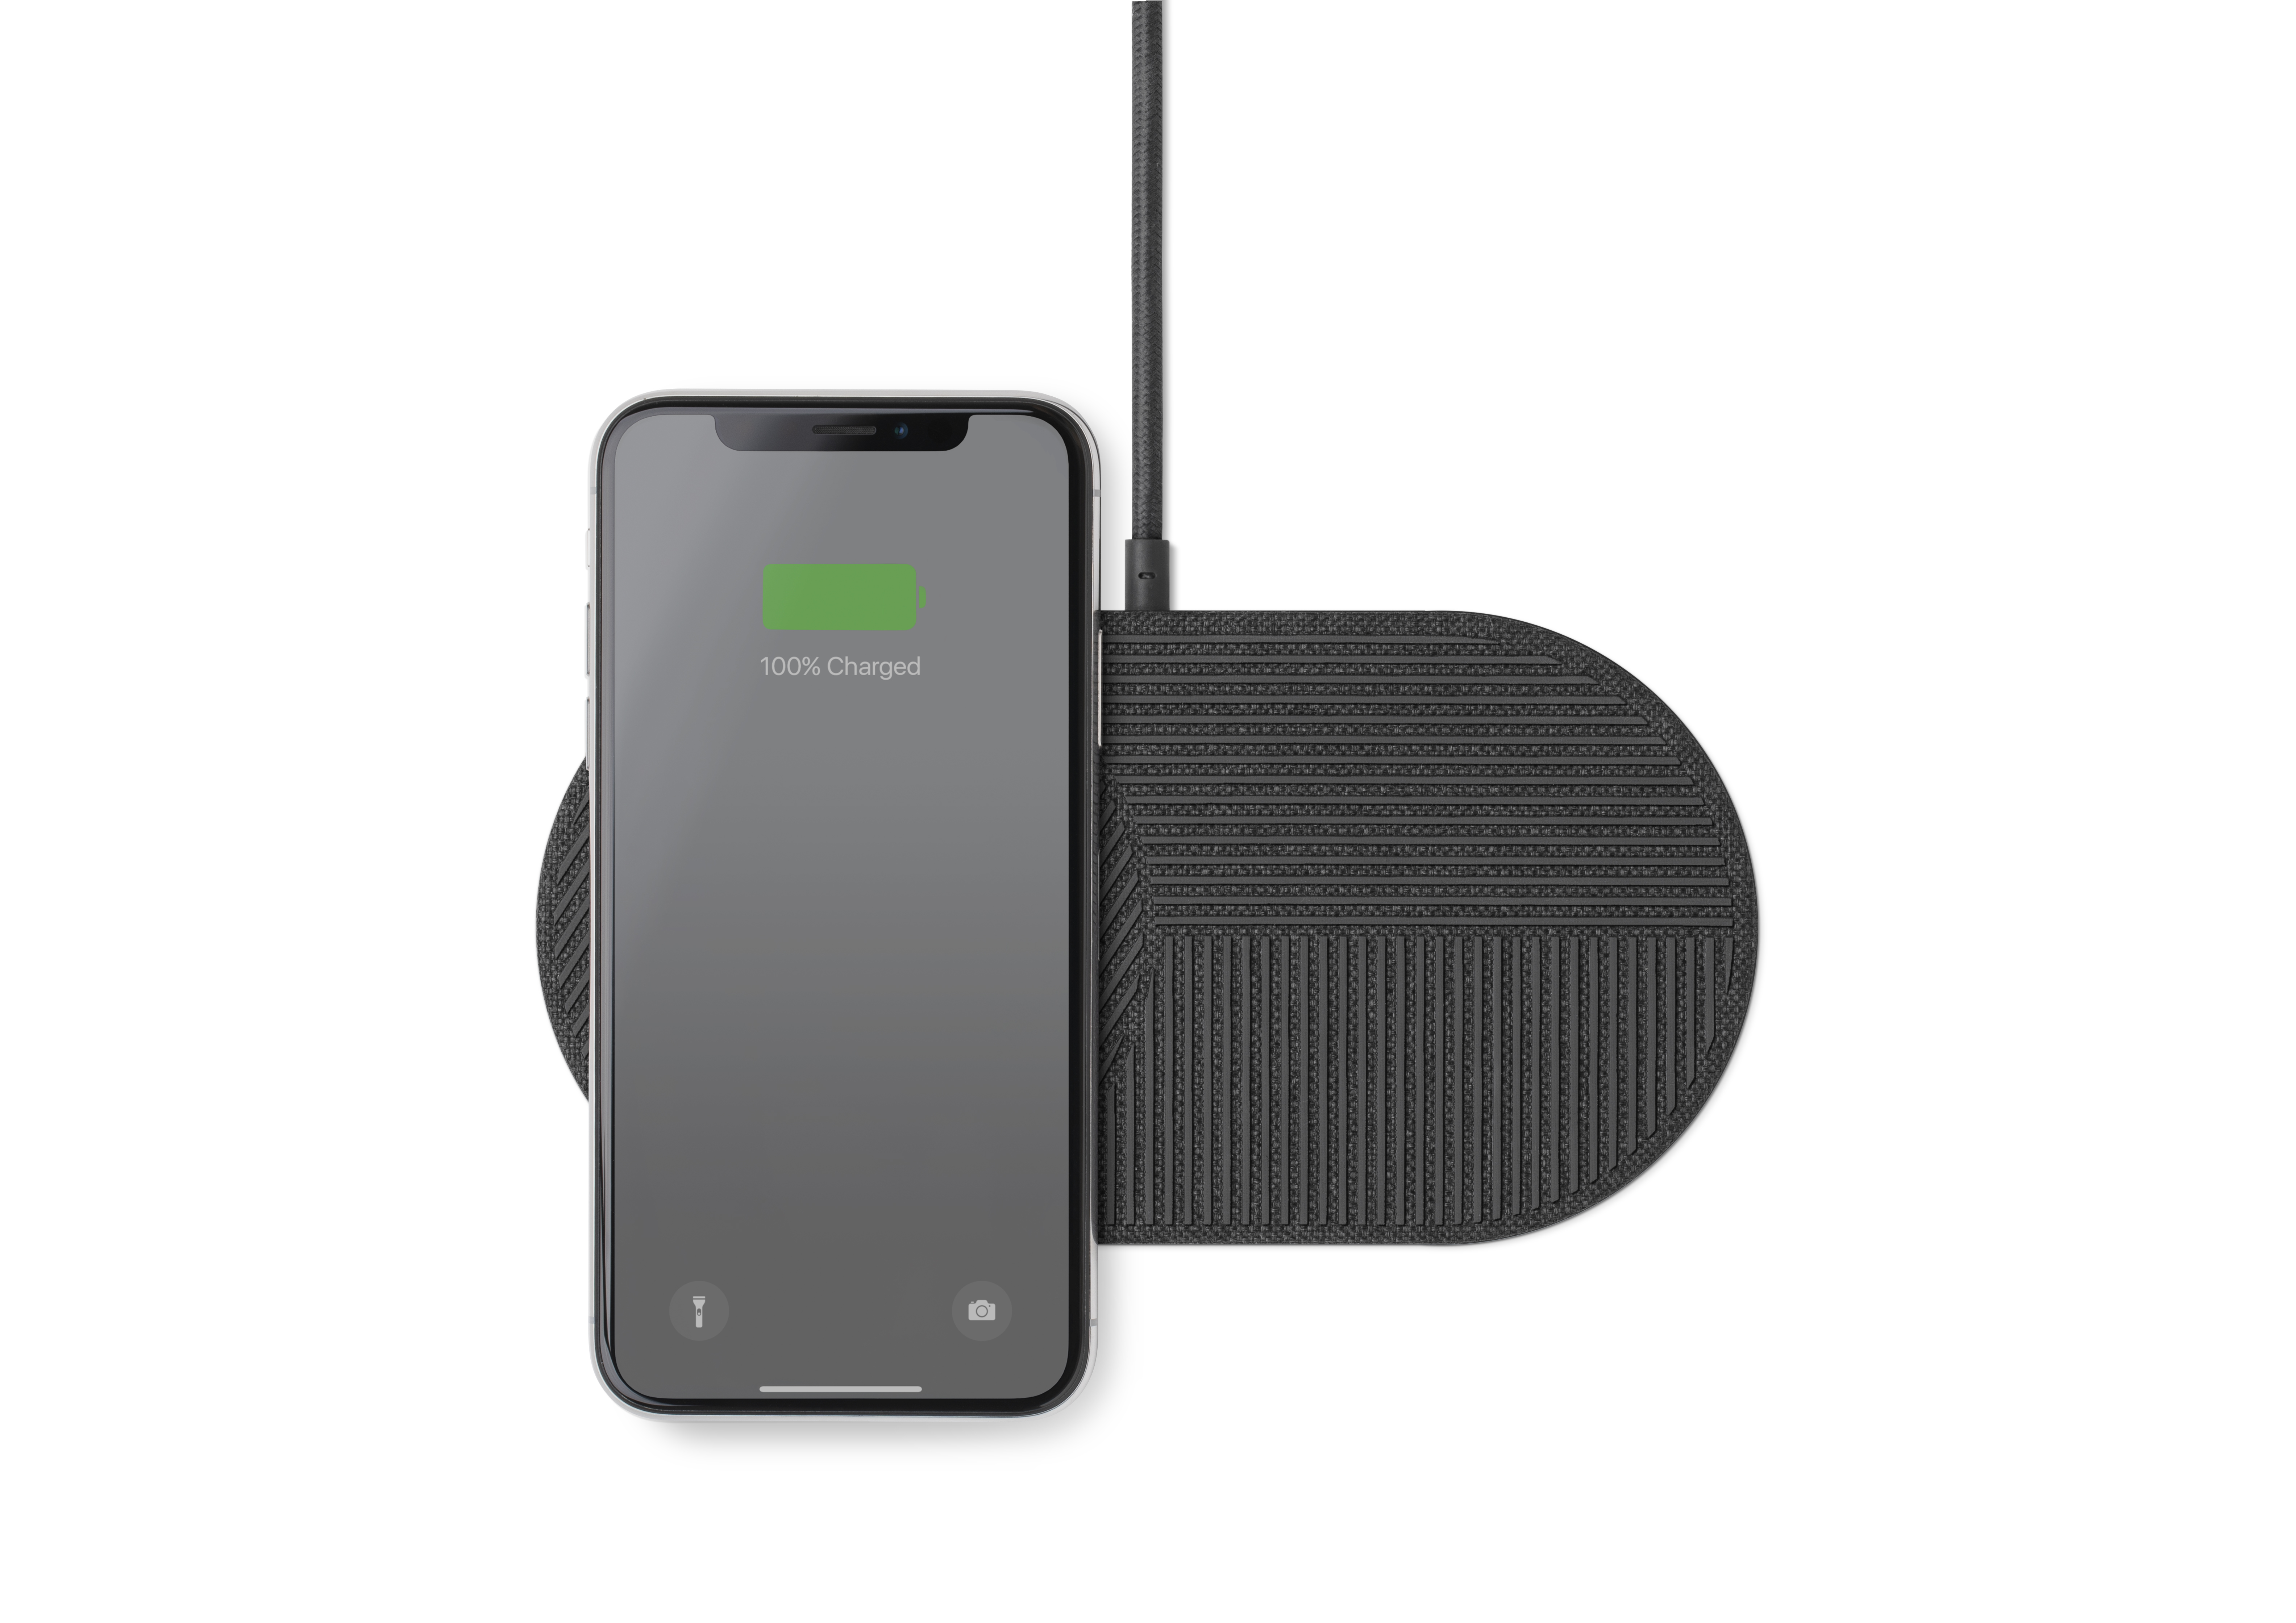 Native Union Drop XL Wireless Charger